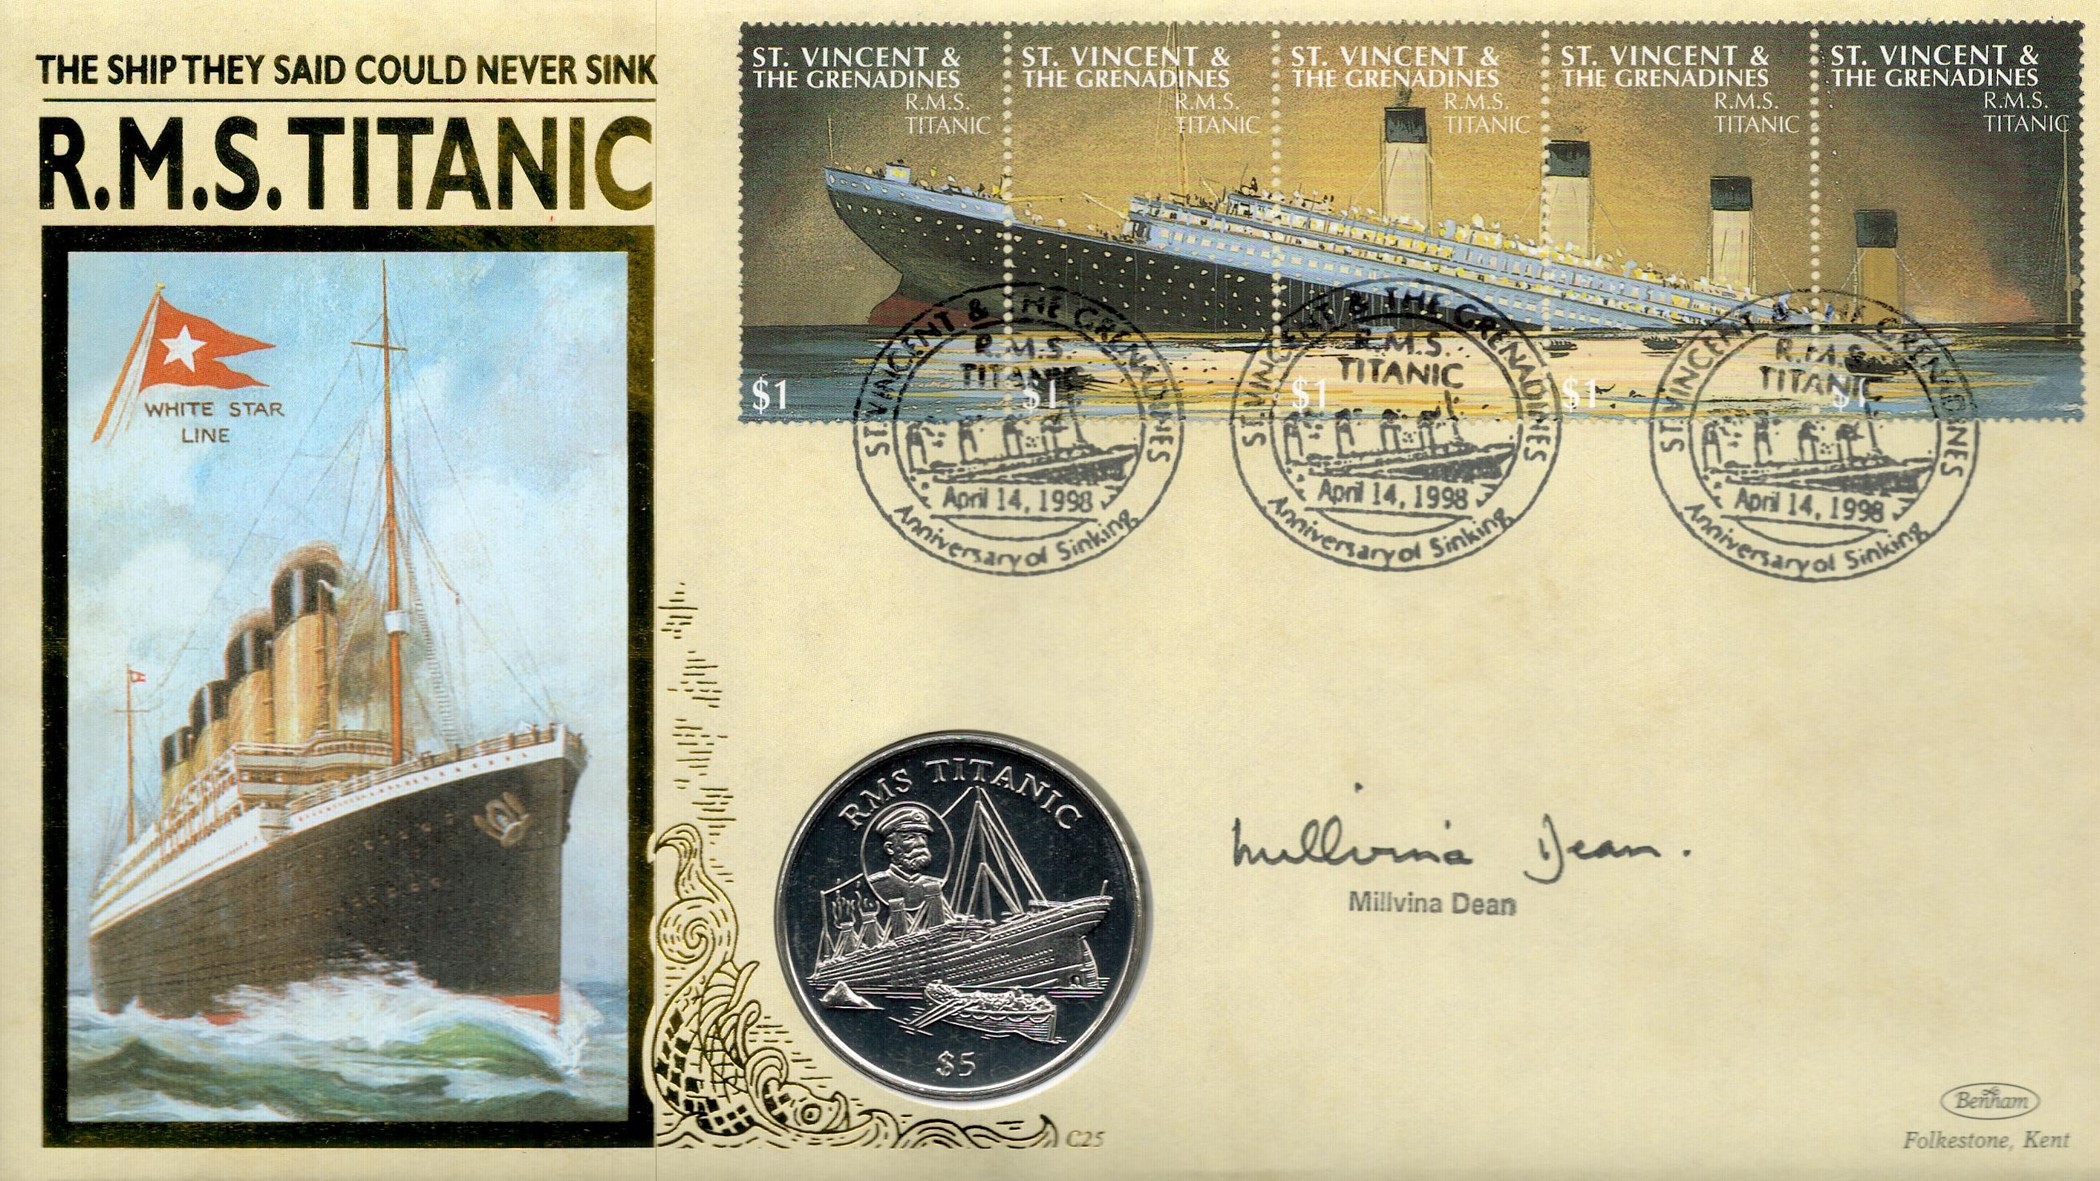 Millvina Dean Signed RMS Titanic Benhams Cover with RMS Silver Titanic $5 Coin. 5 St Vincent and The